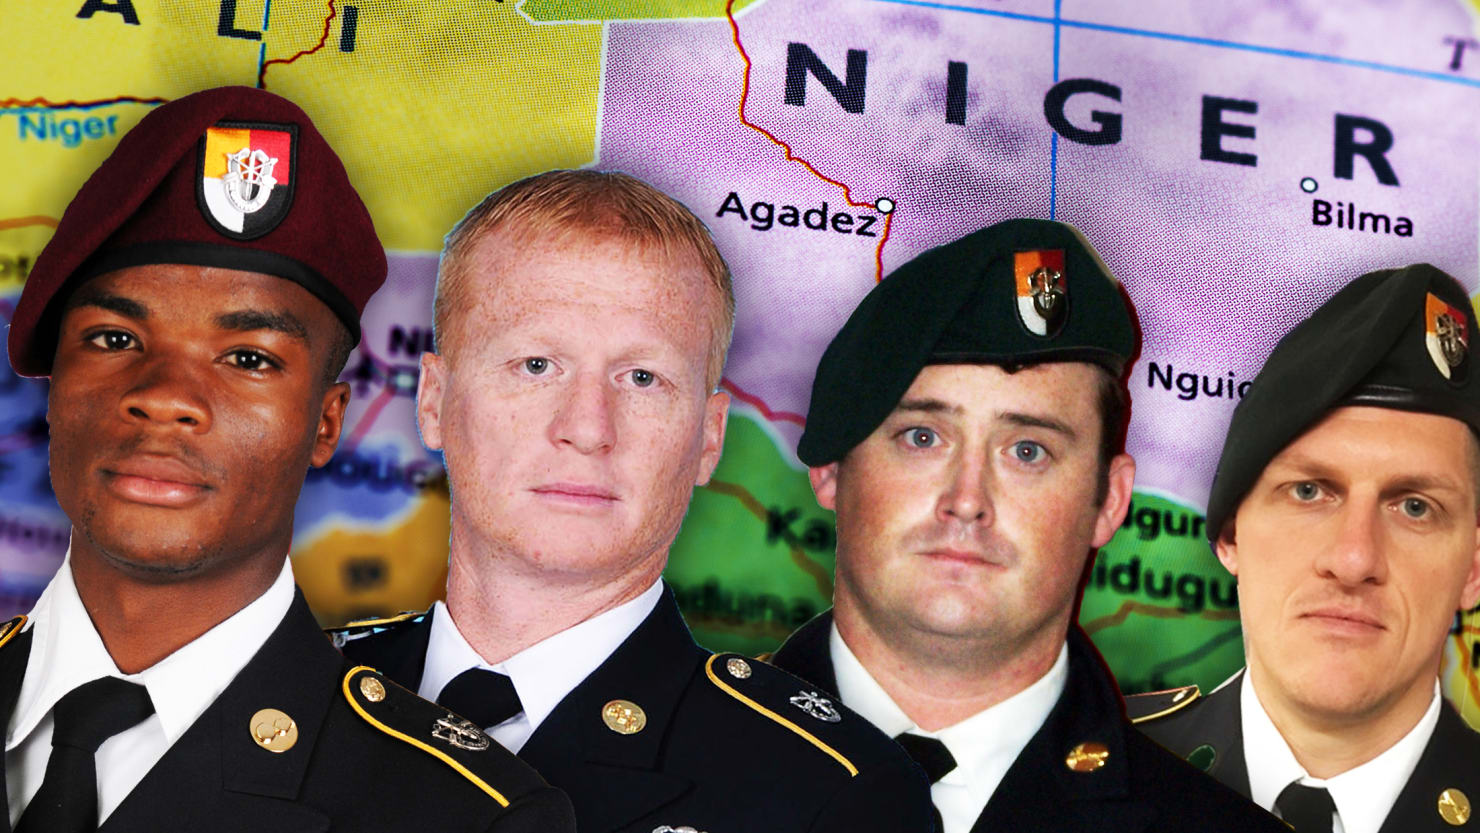 Senators Are Stunned To Discover We Have 1,000 Troops In Niger